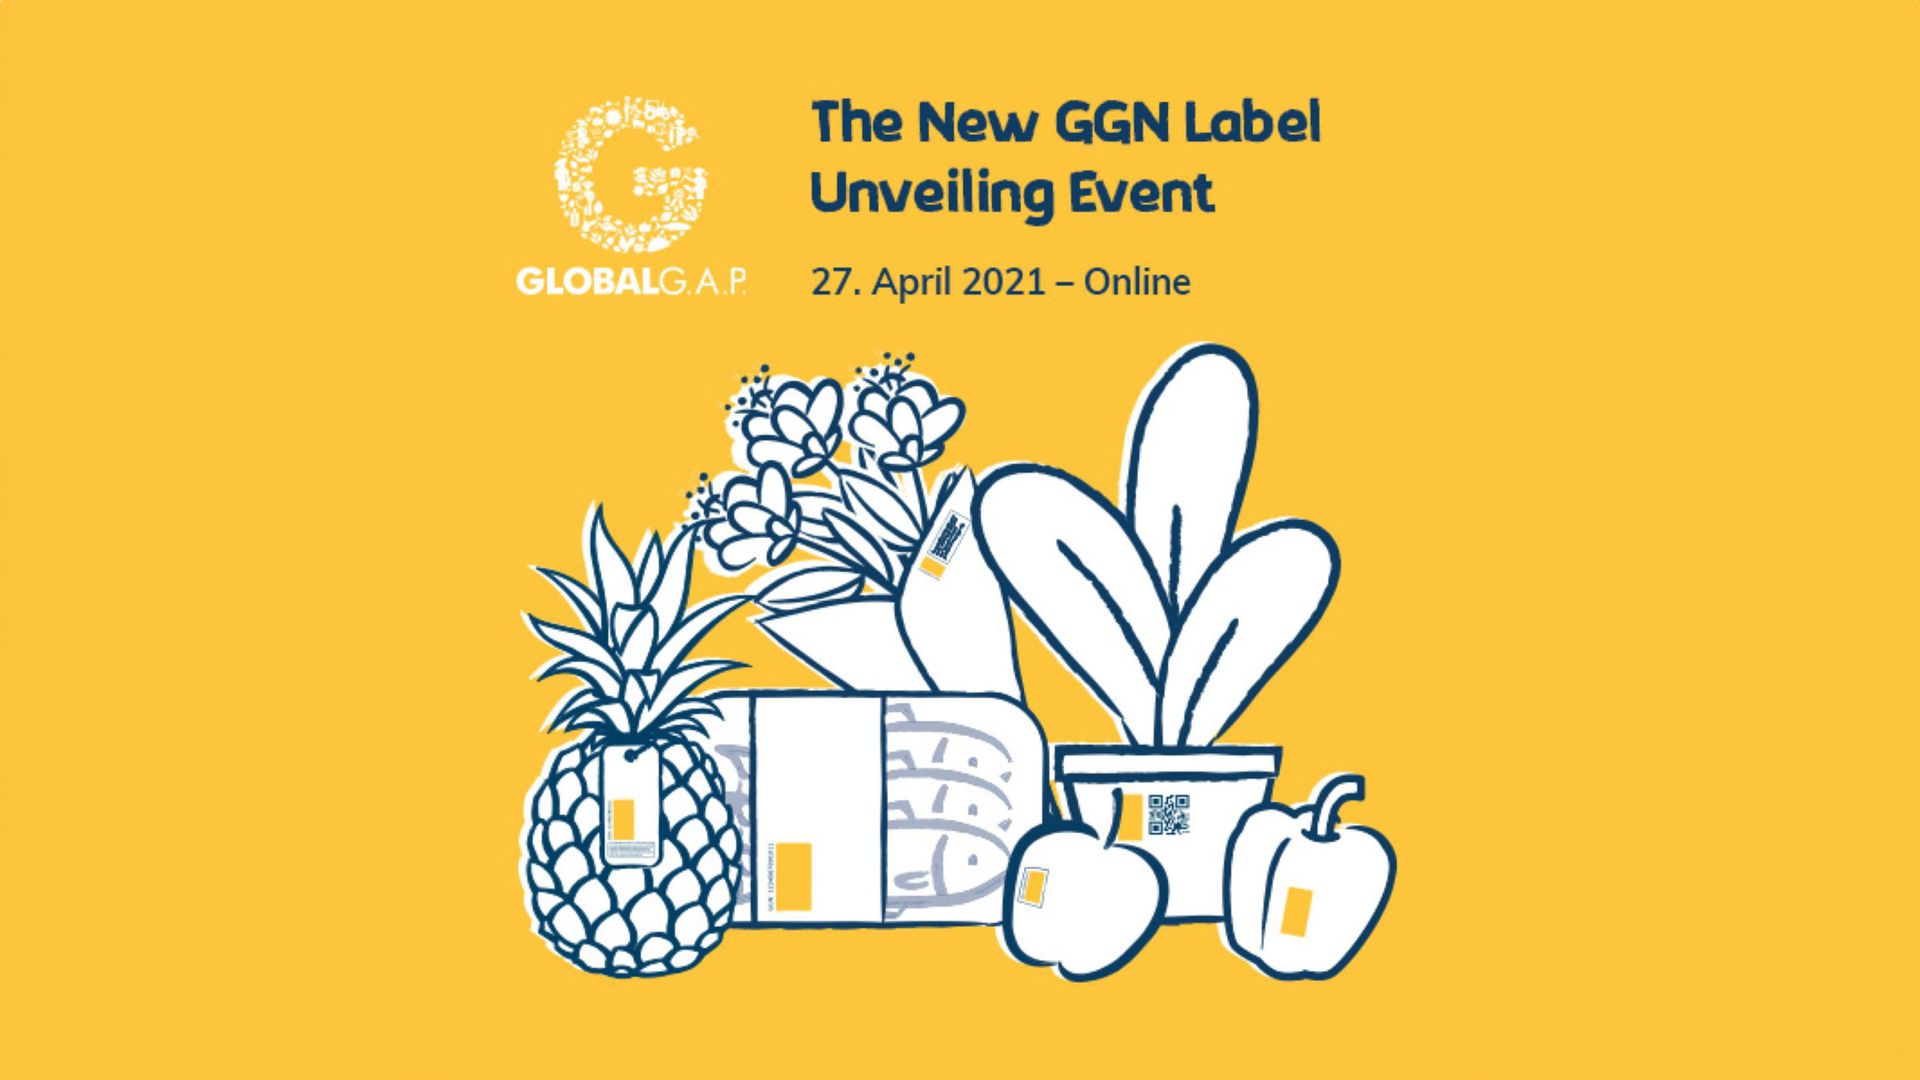 Image of promotional material for the launch of the new-look cross-category GGN label in 2021